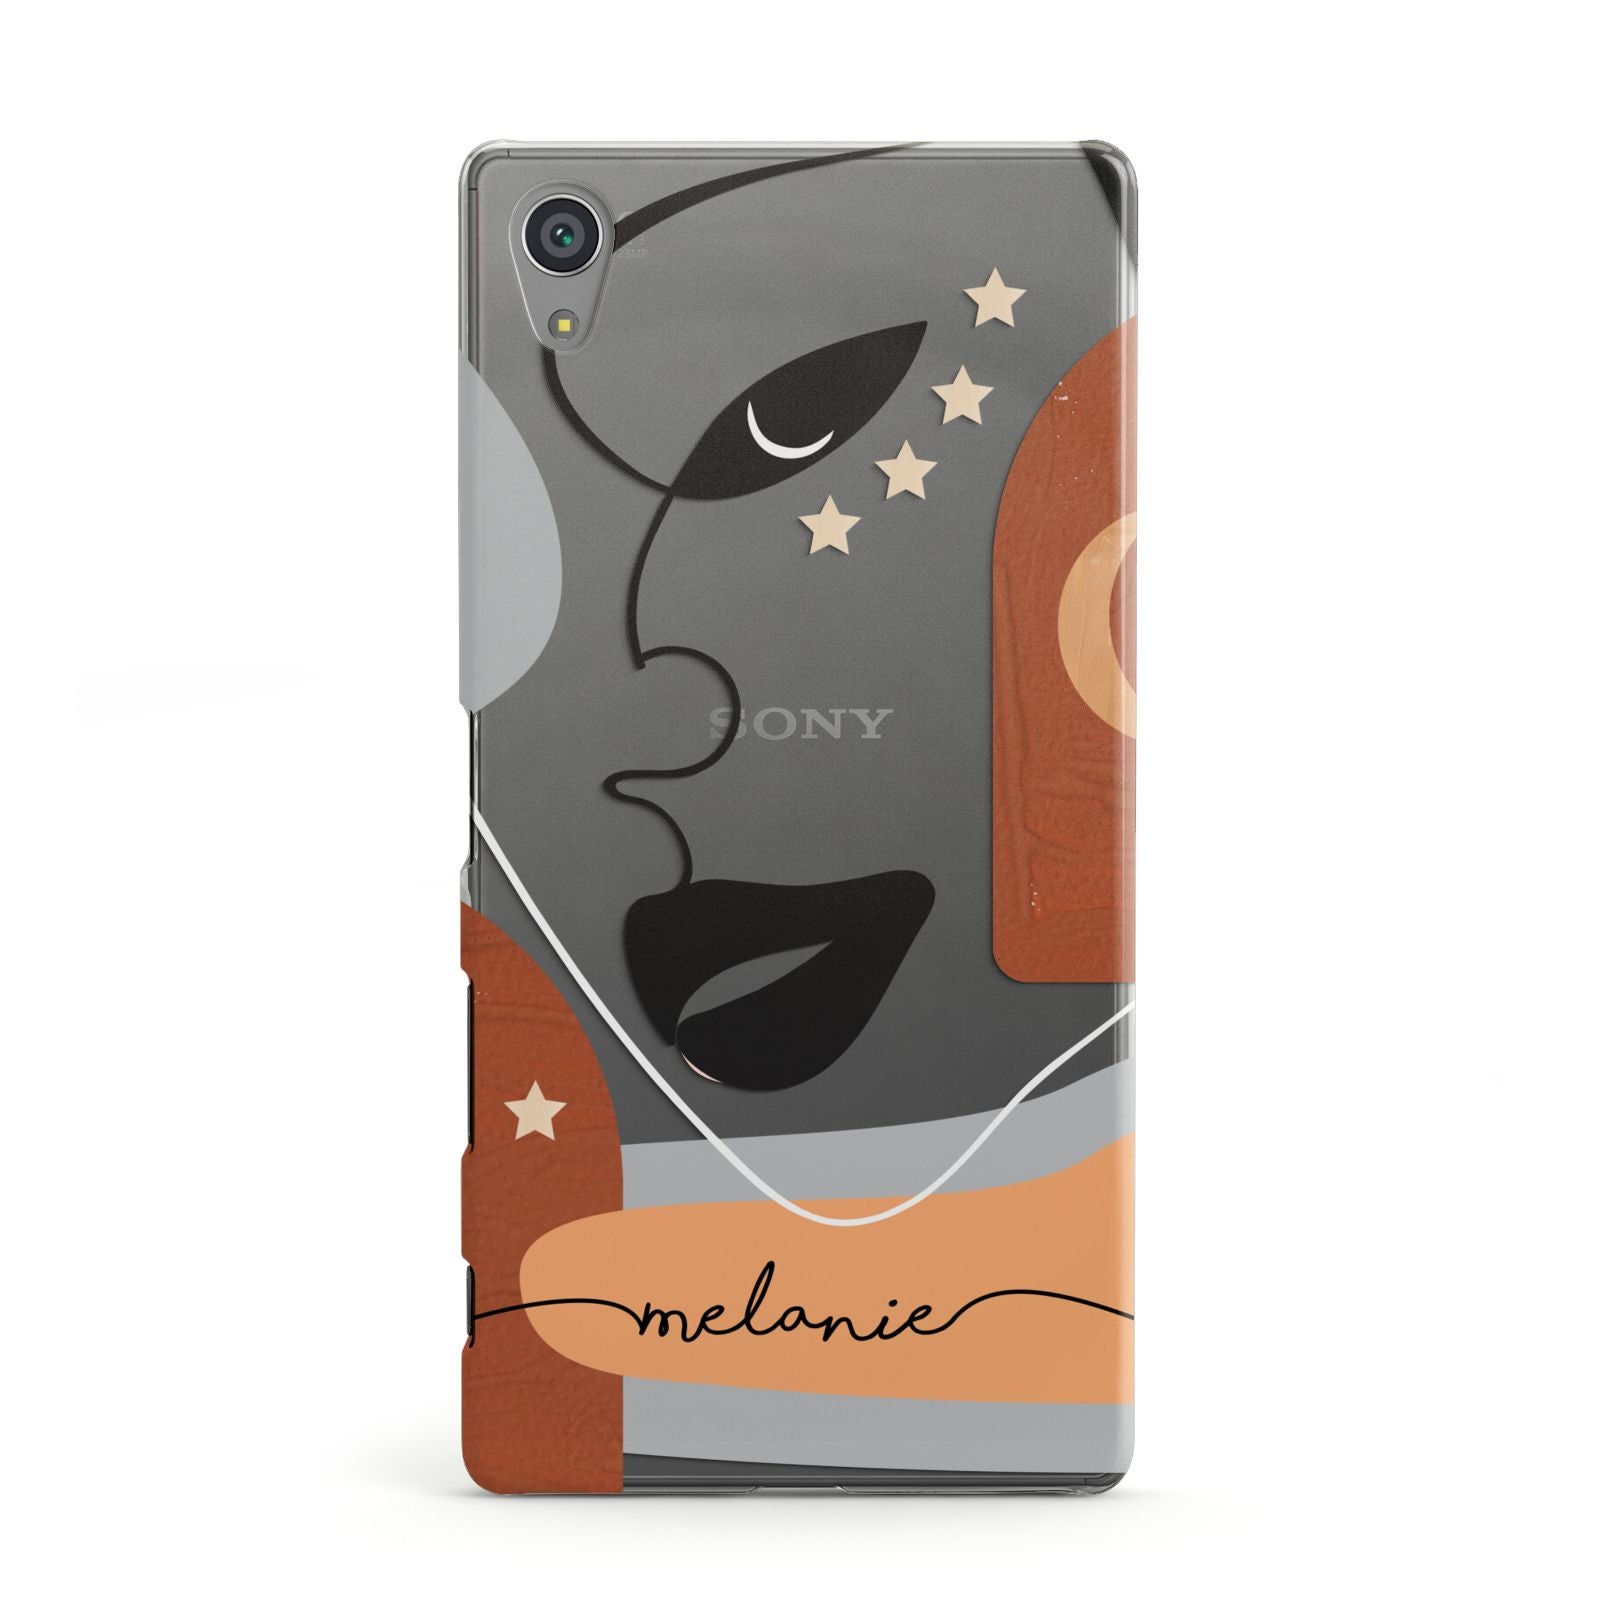 Personalised Line Art Sony Xperia Case